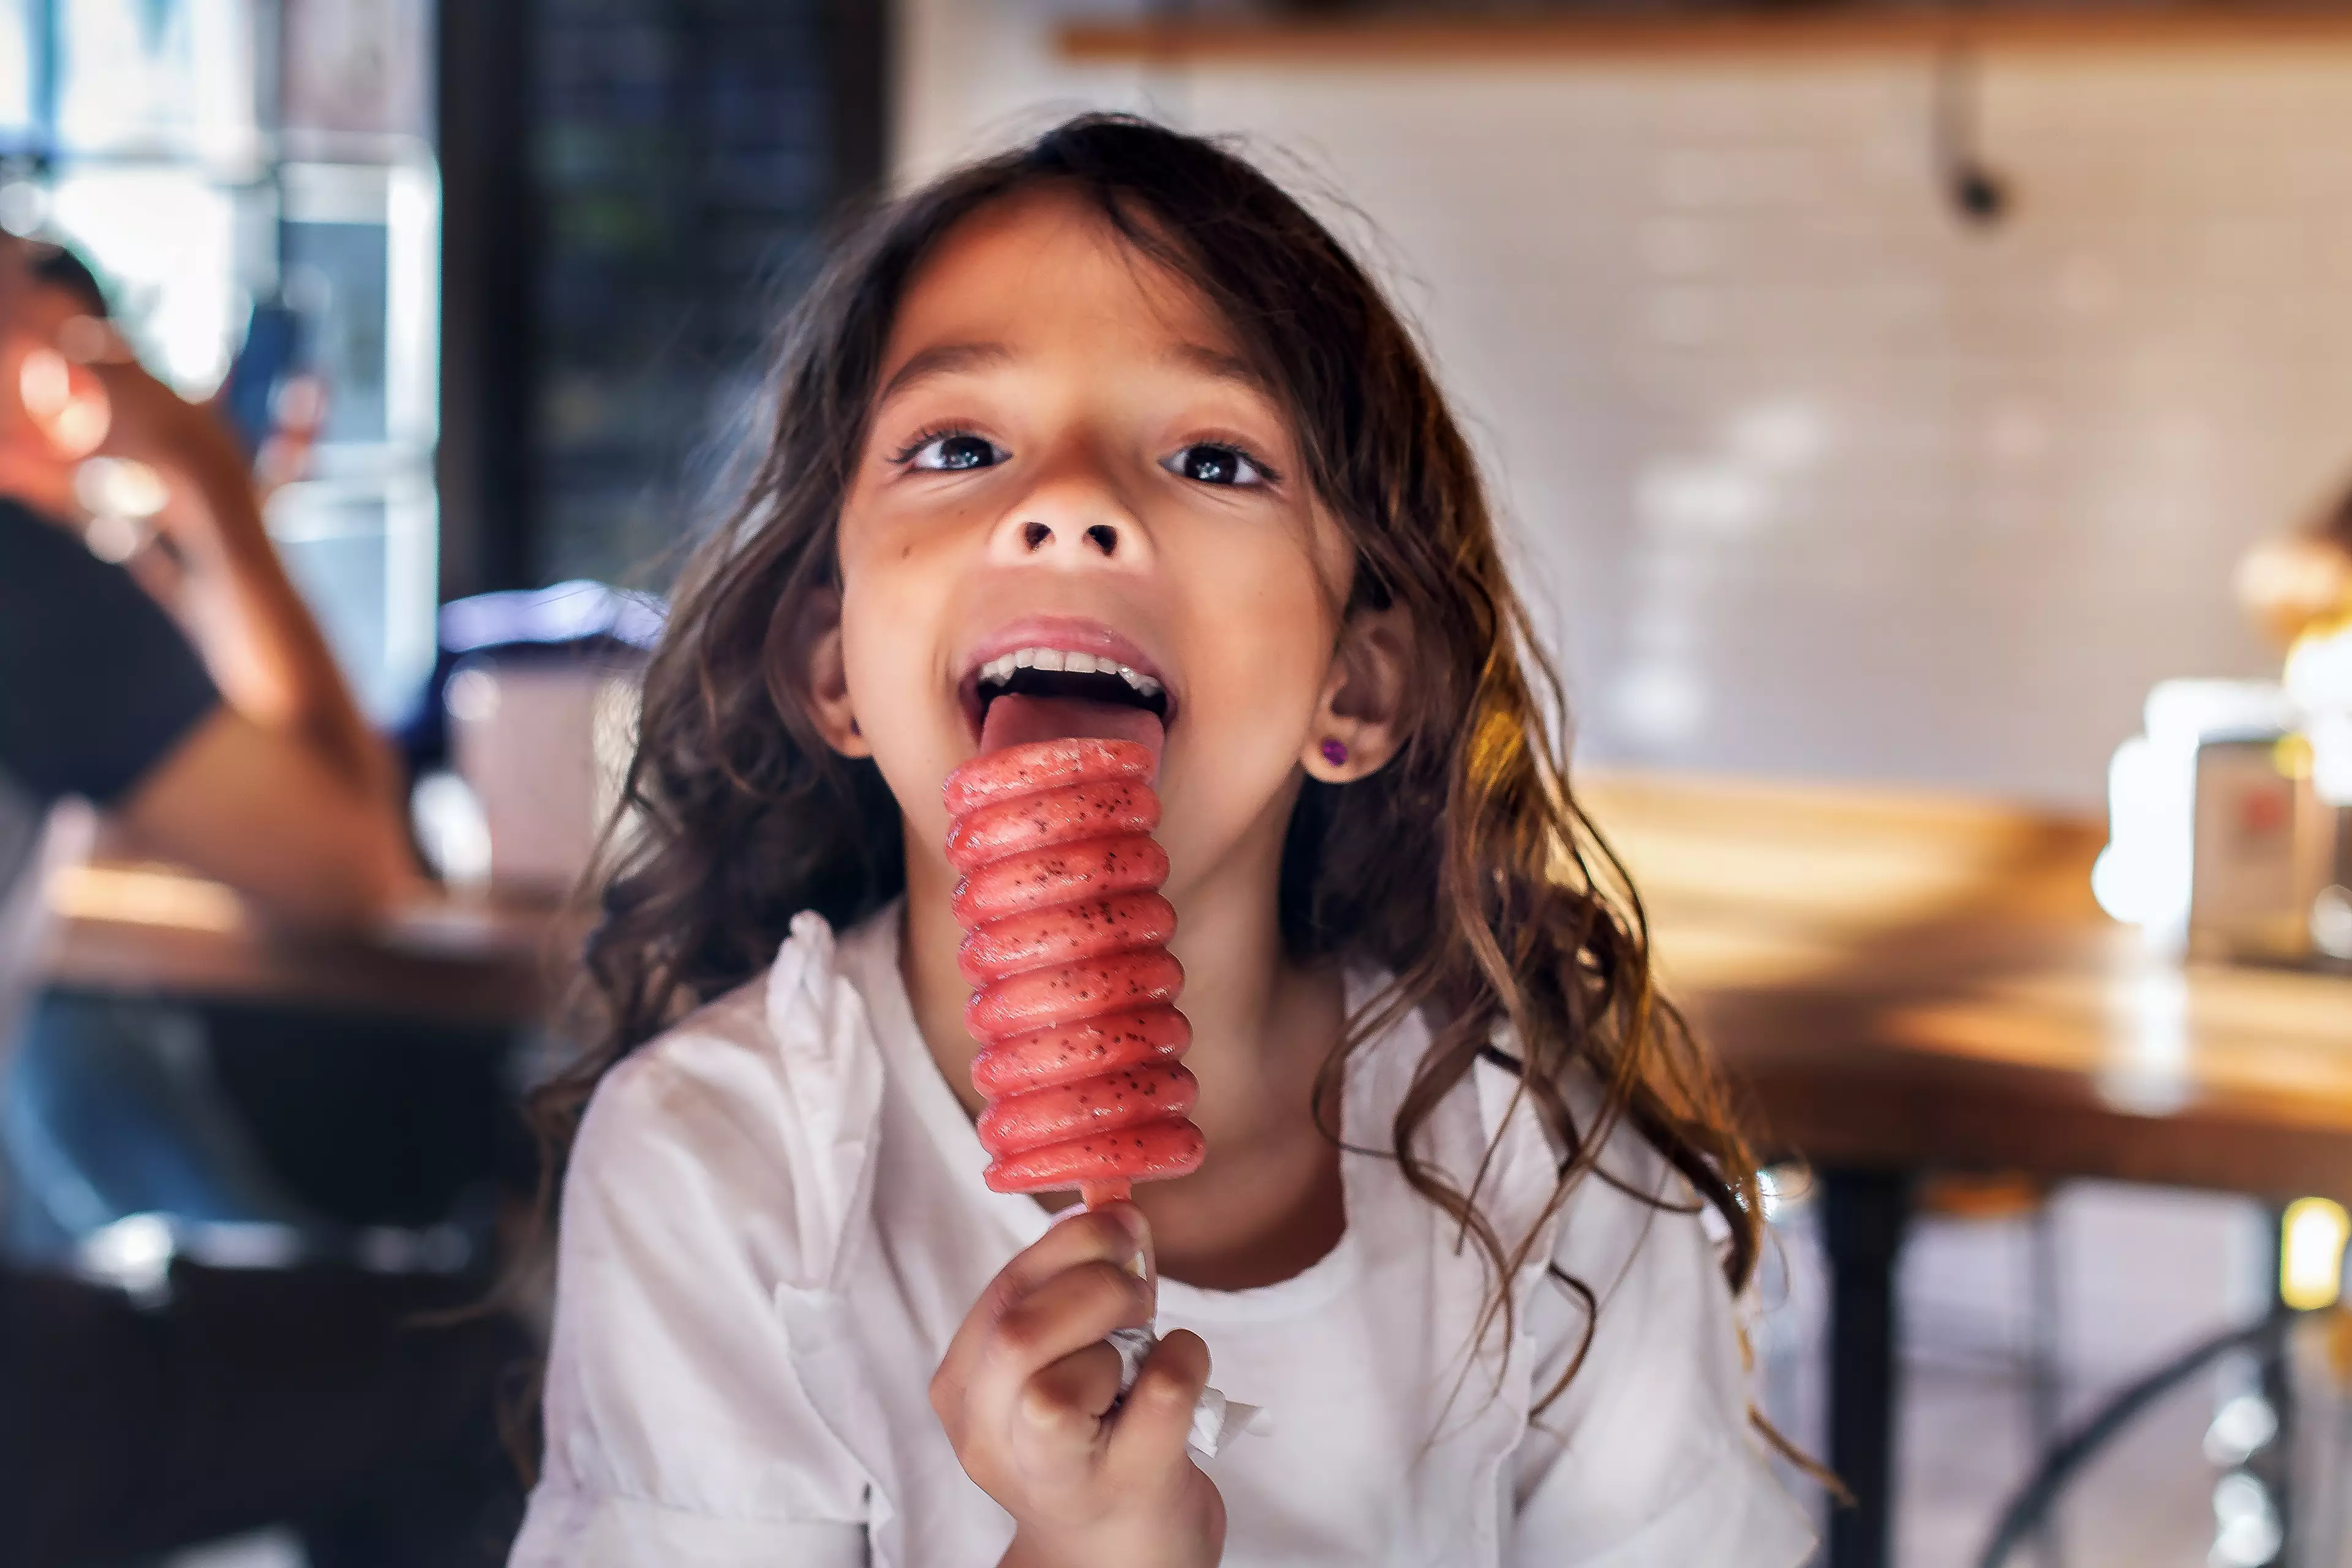 The savvy mum knows too well how messy ice lollies can be for kids (